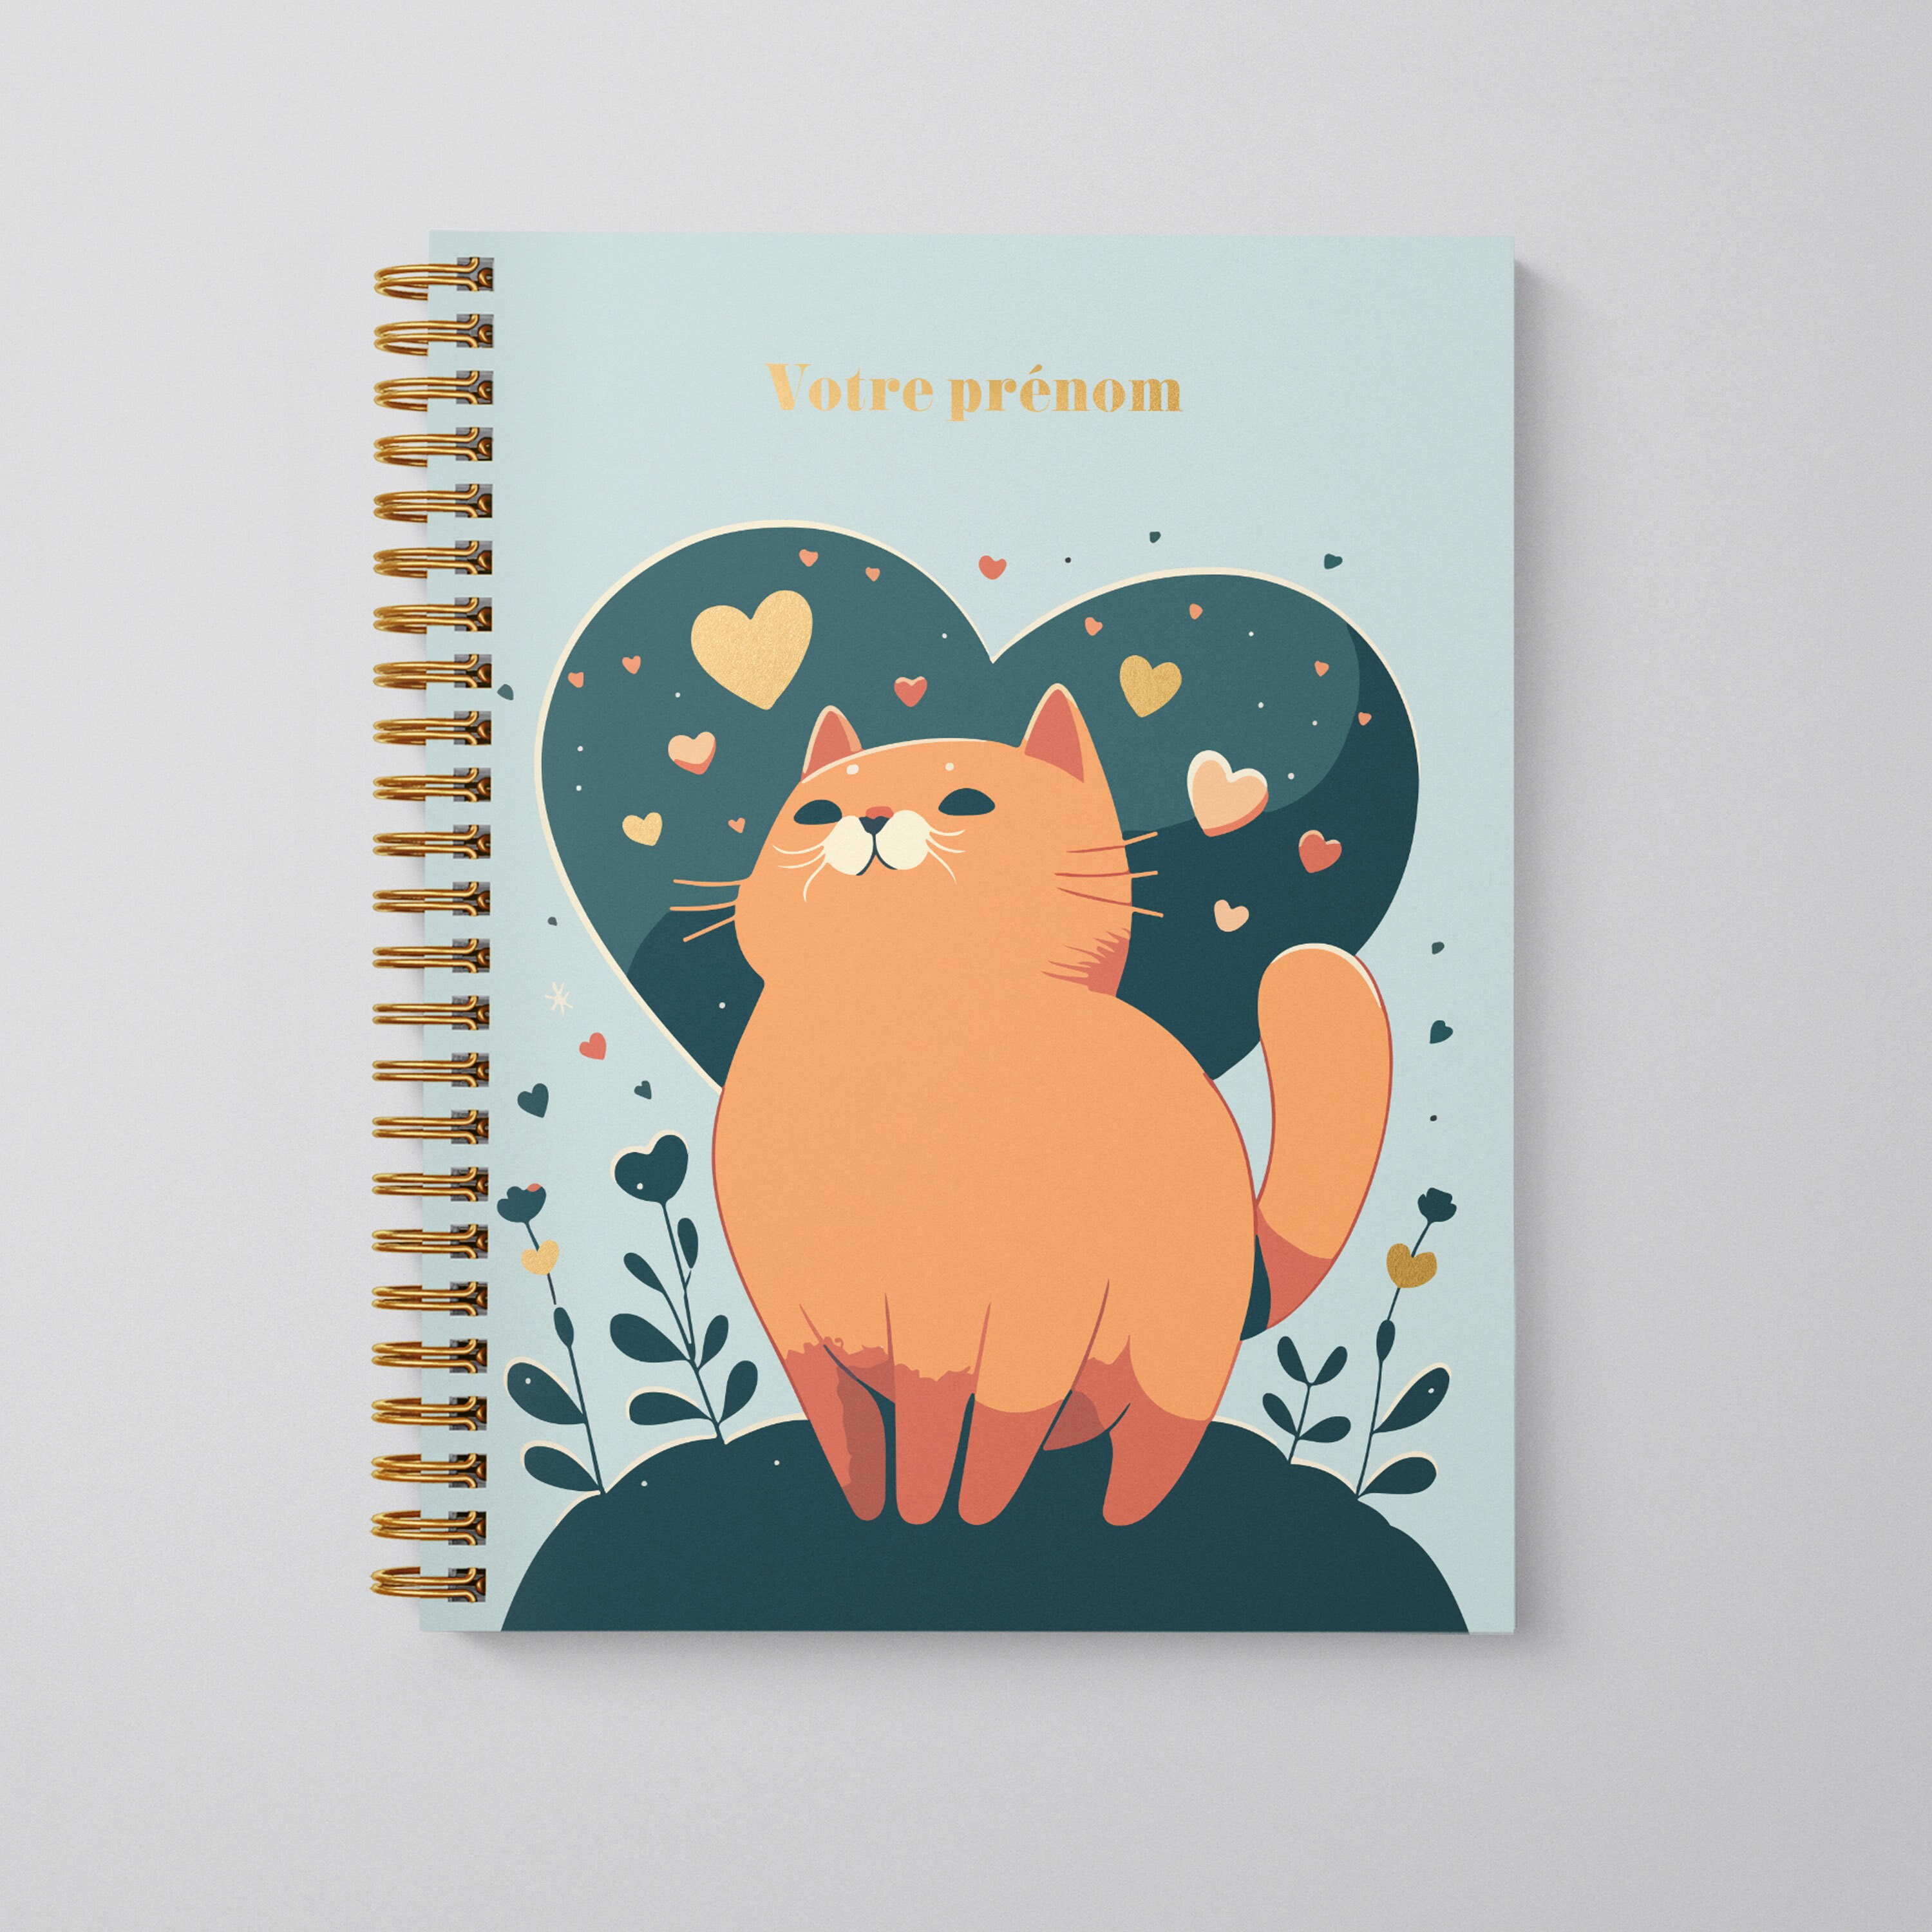 Cats Daily Planner 2024: Make 2024 a Meowy Year! Cute Kitten Year  Organizer: January-December (12 Months) by Happy Oak Tree Press, Paperback